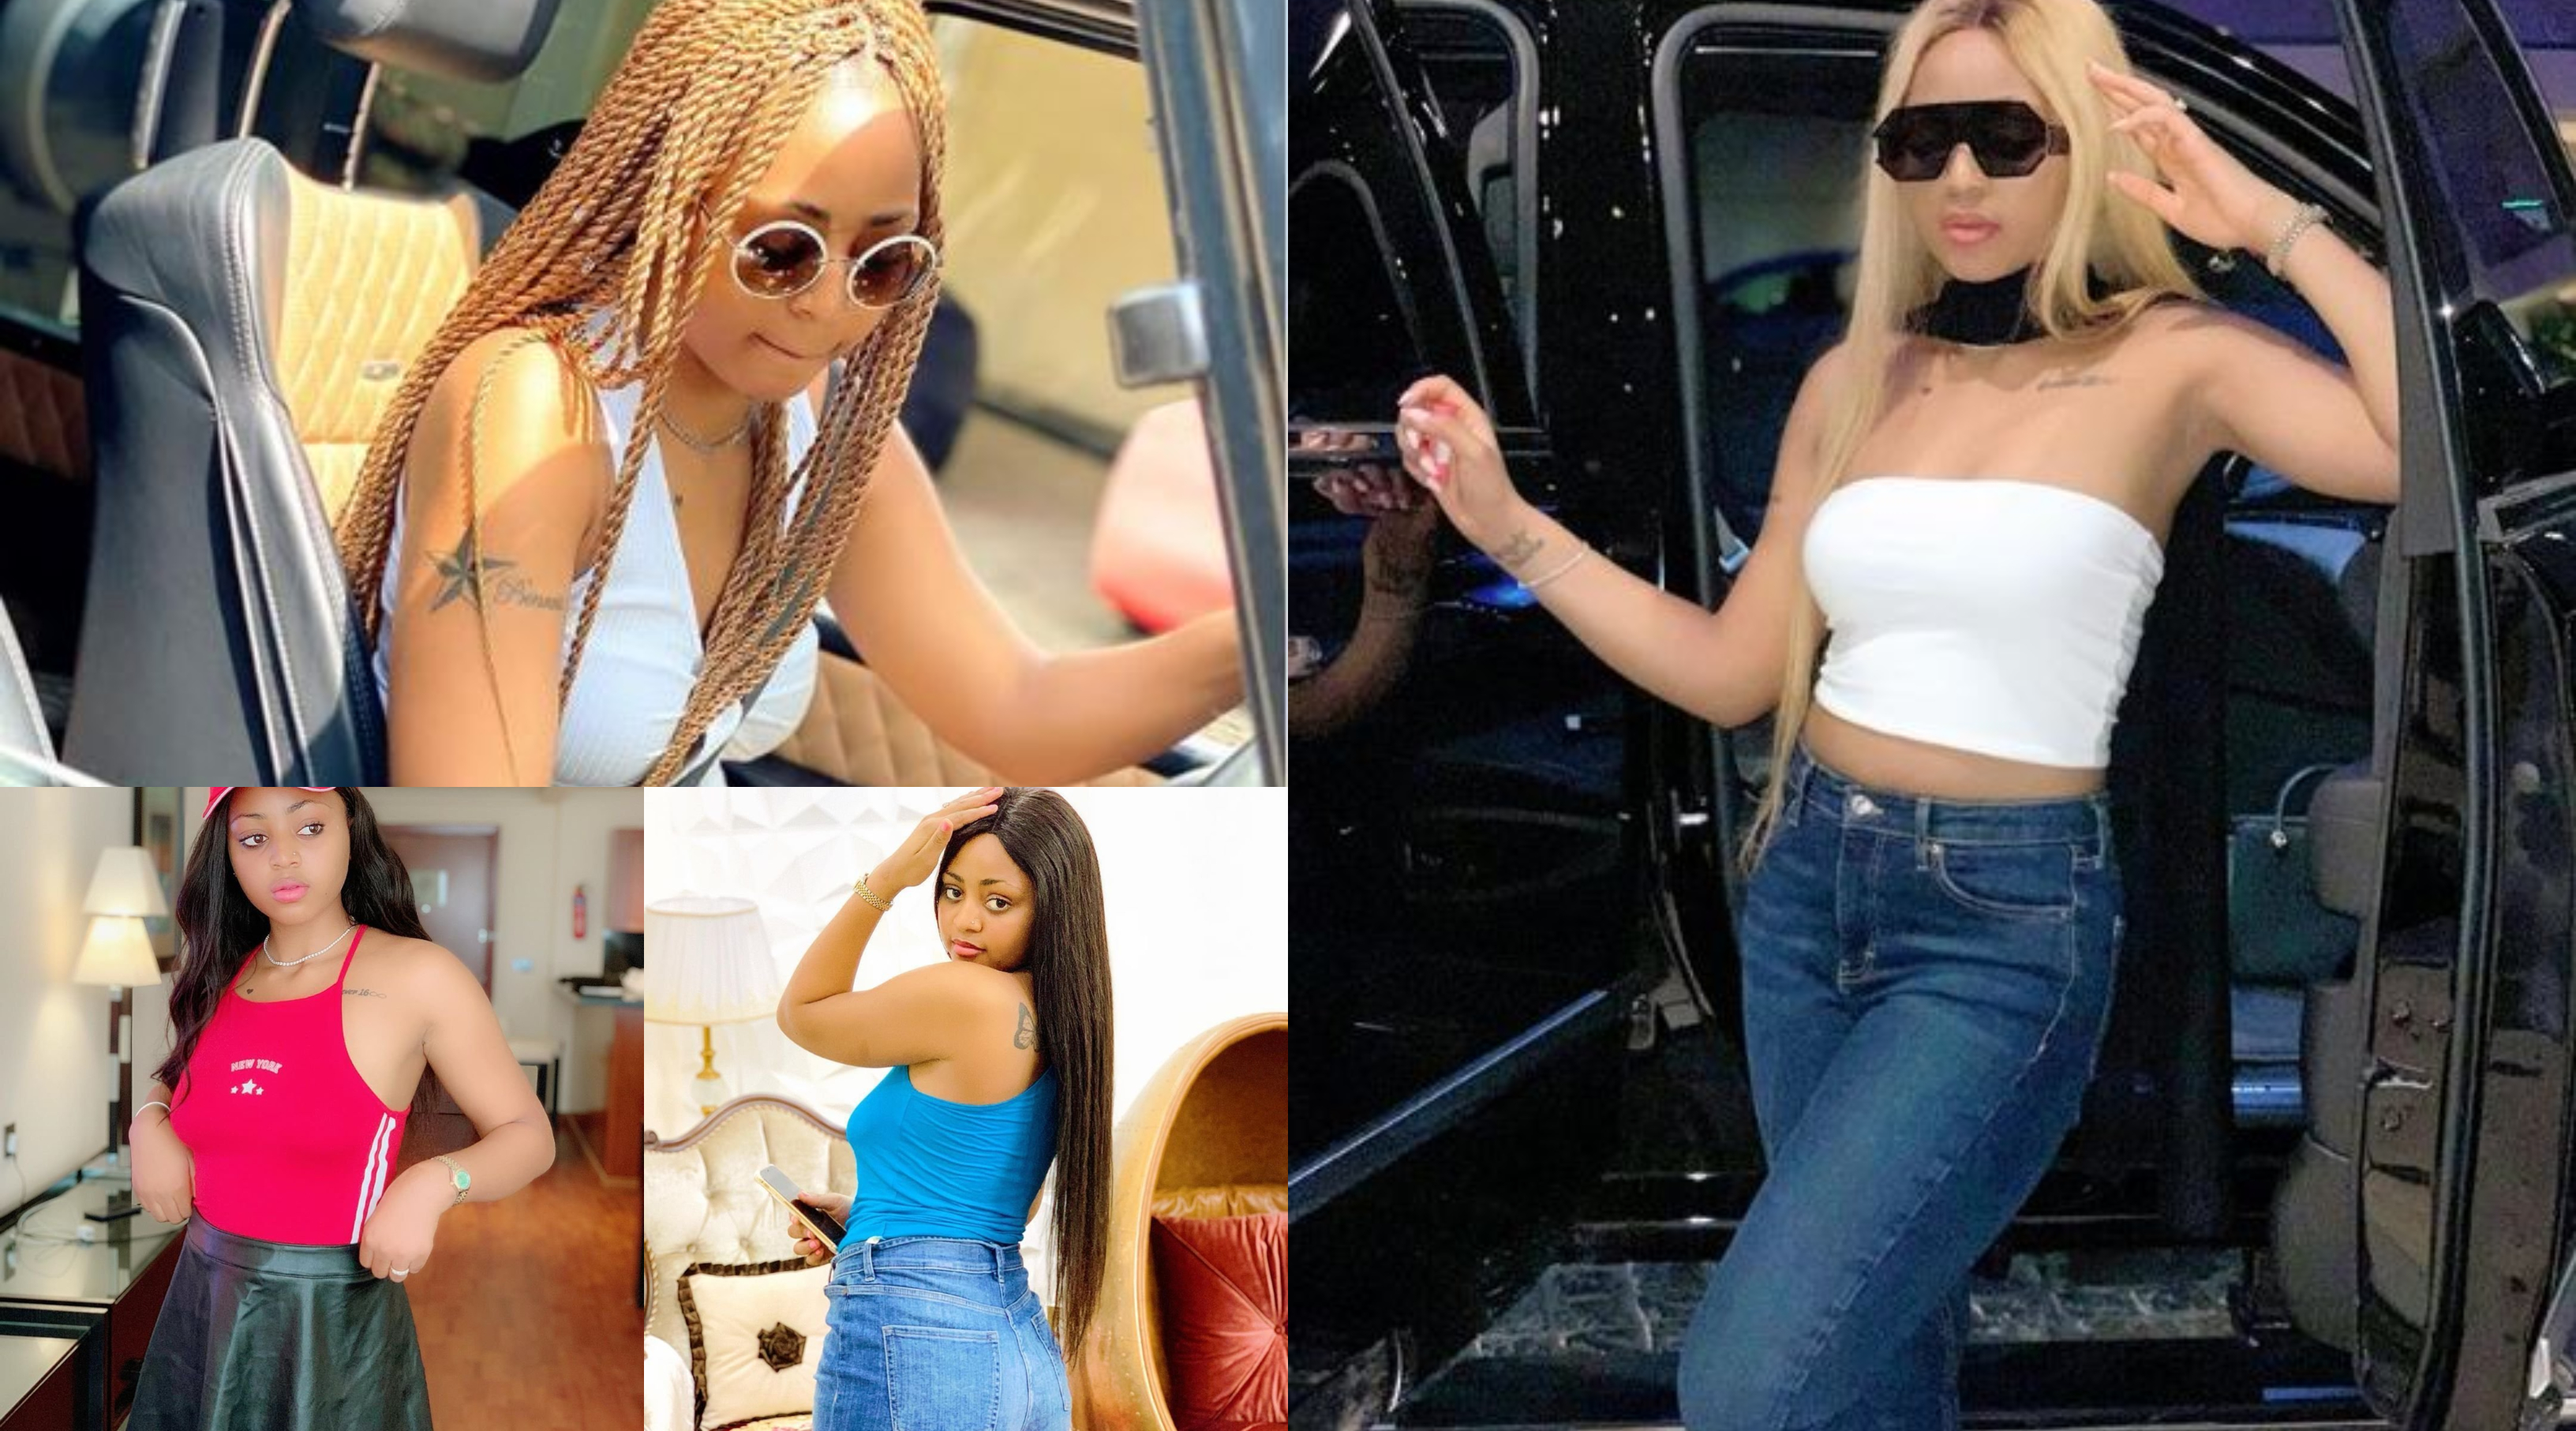 Princess on the right arm, Heart shape, Butterfly – Check out all Regina Daniels’ 7 tattoos and what they mean (PICS)